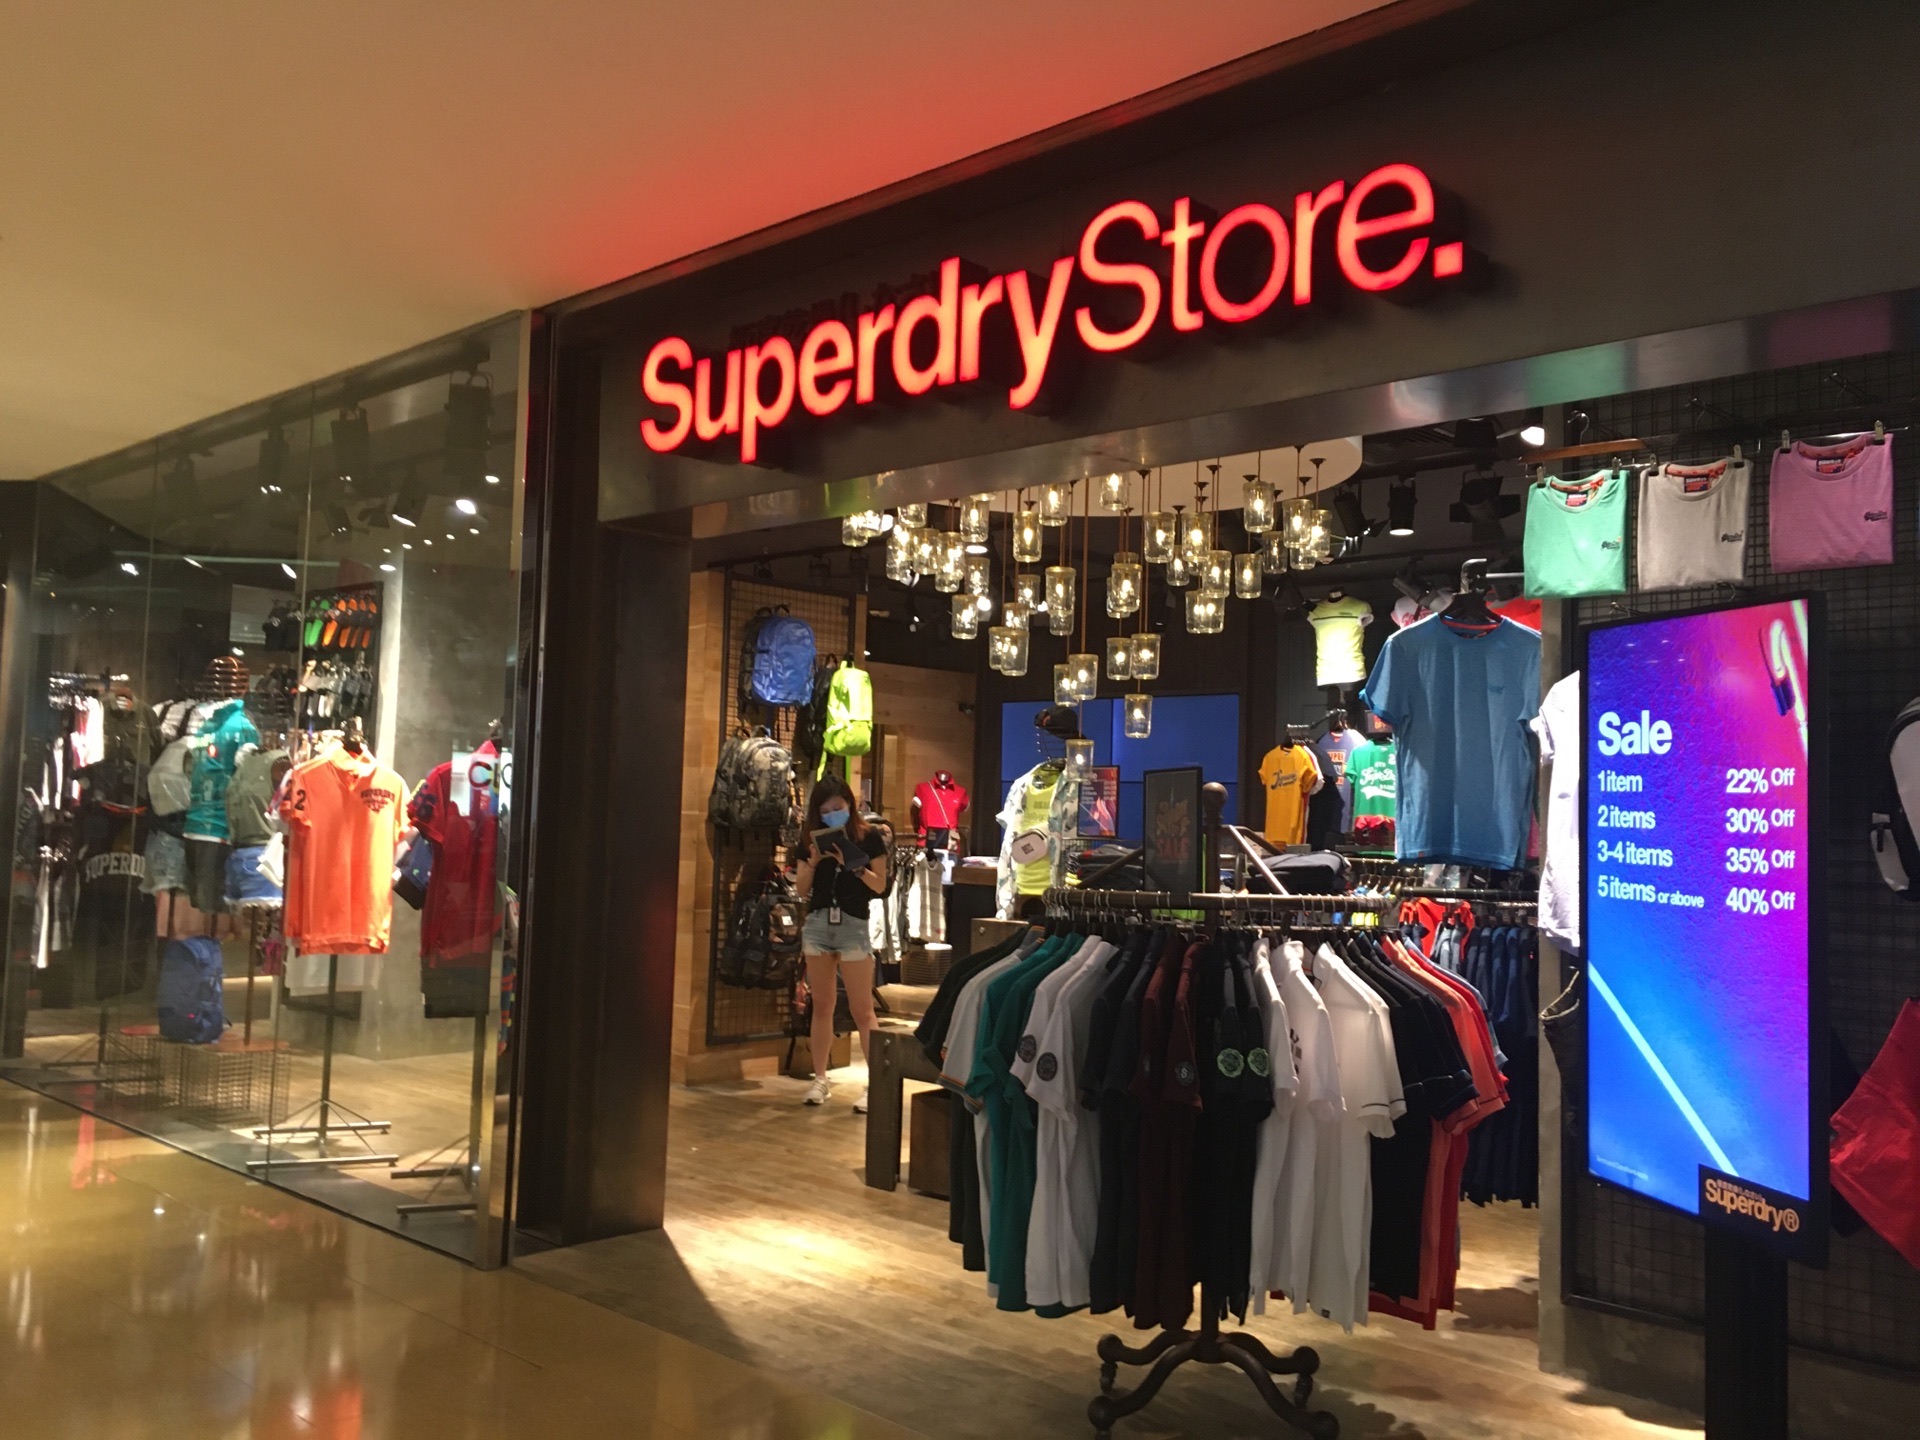 Shopping itineraries in Superdry ™ in 2023-05-29T17:00:00-07:00 (updated in  2023-05-29T17:00:00-07:00) - Trip.com